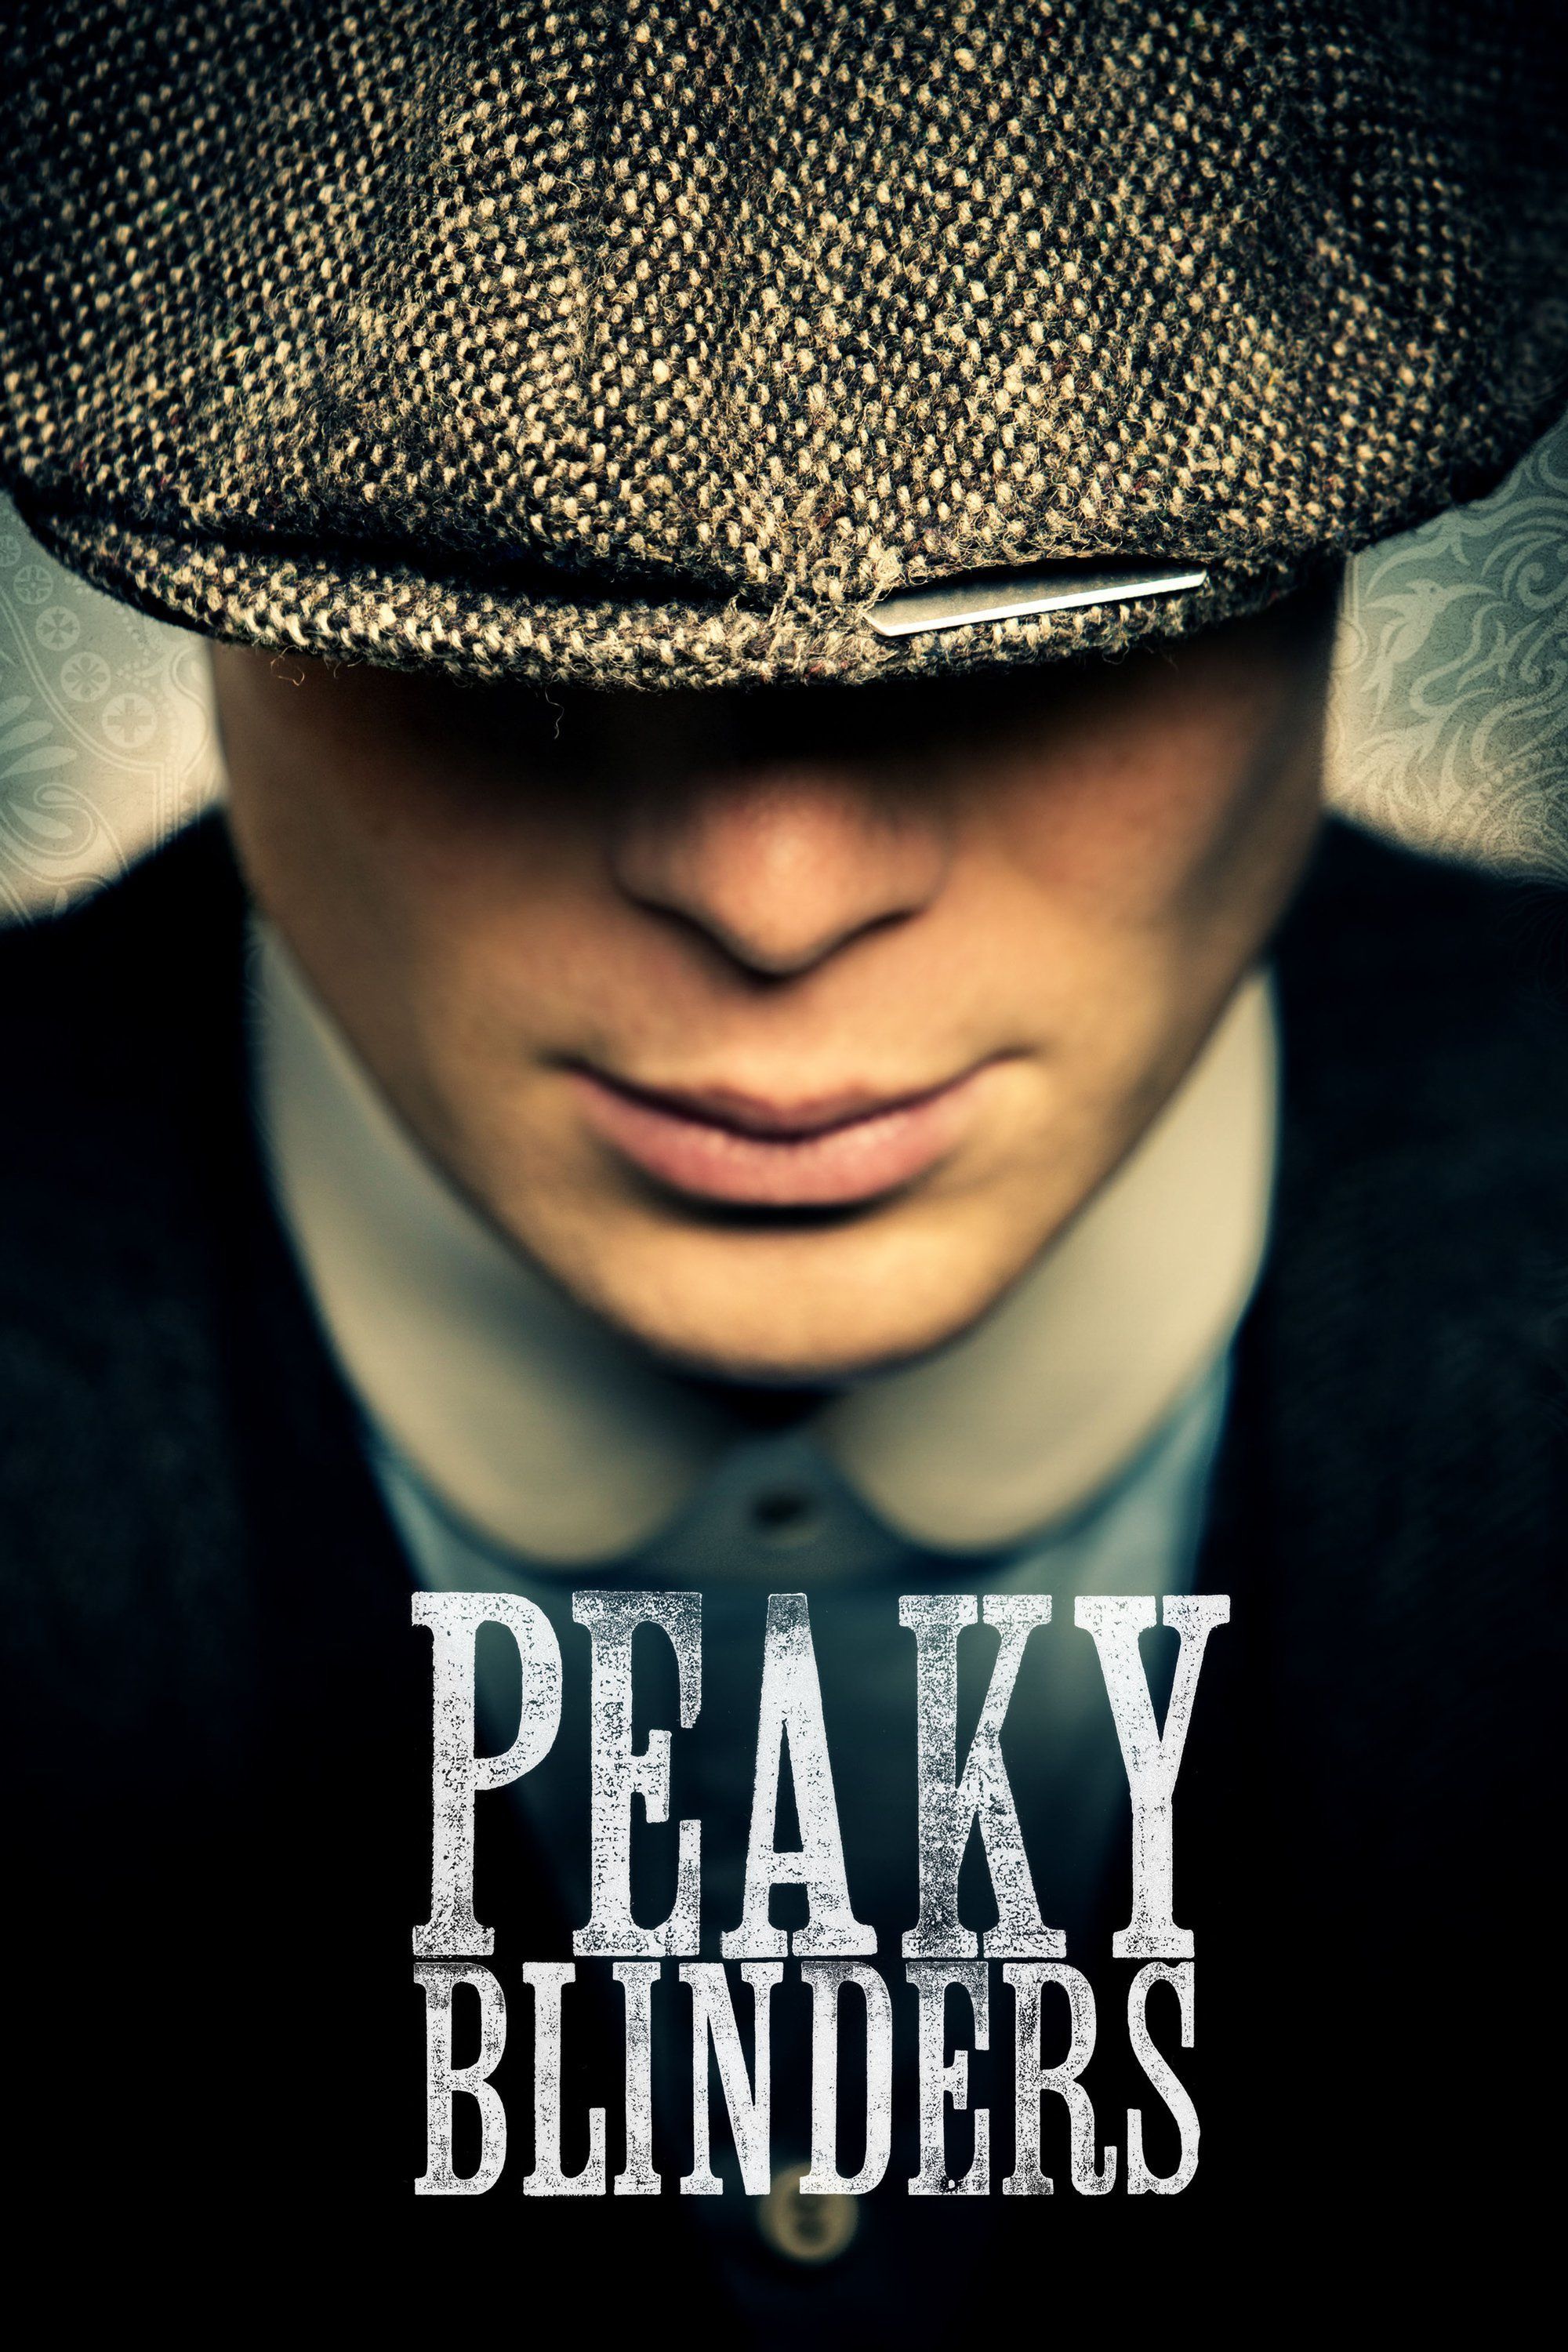 Best Peaky Blinders TV Show Quotes